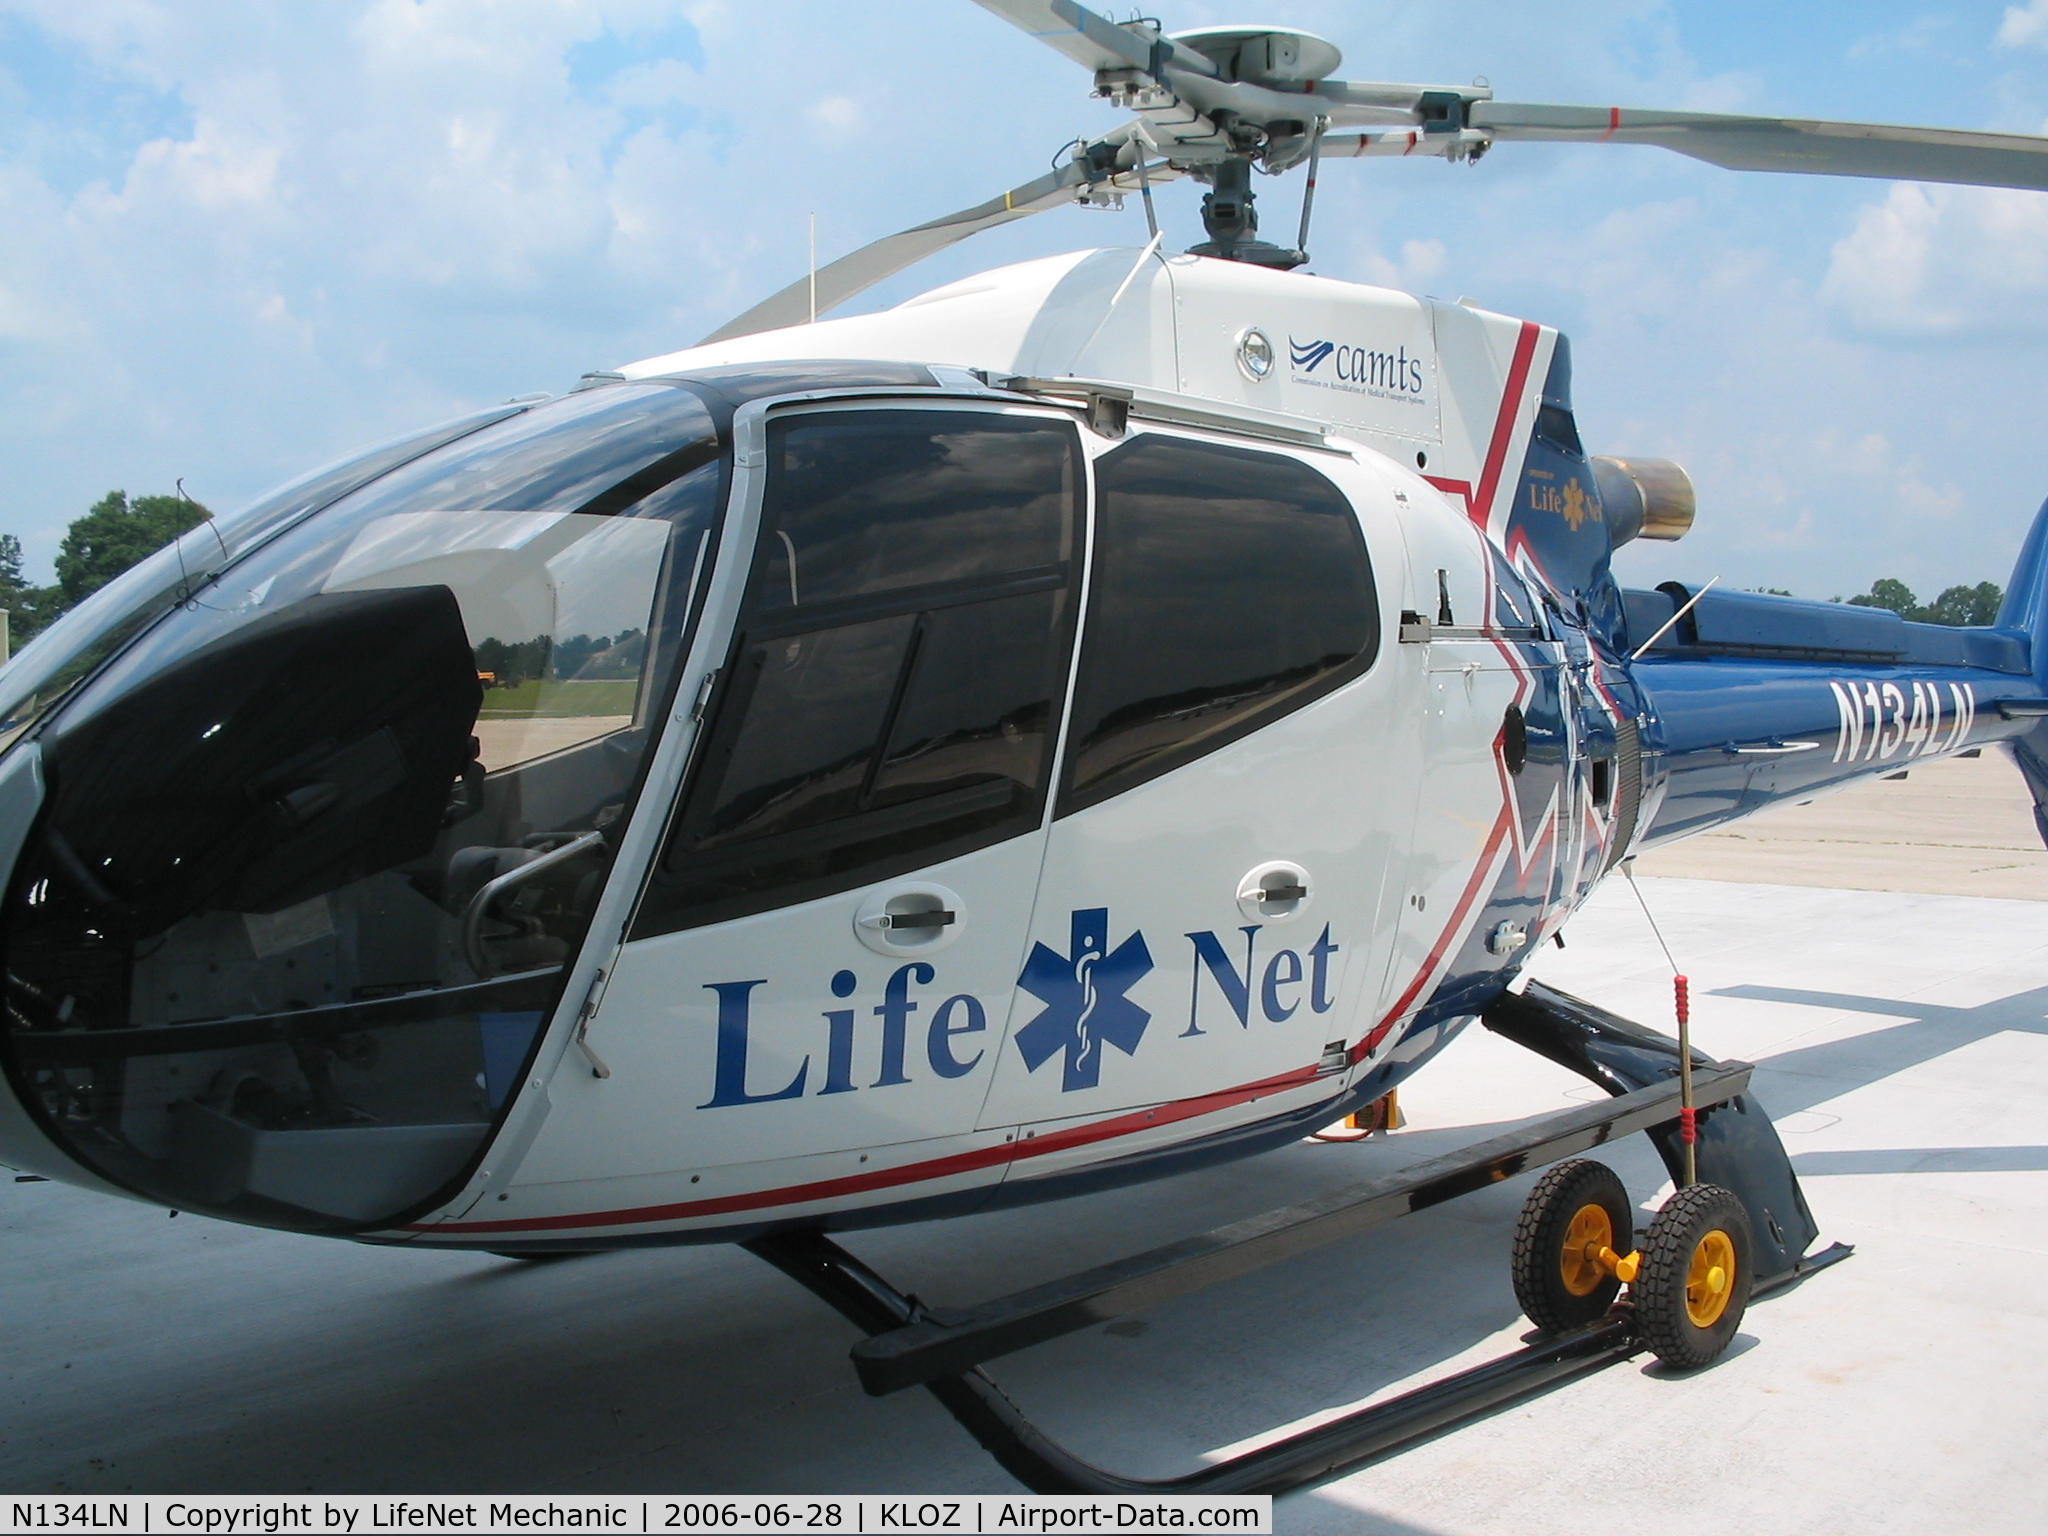 N134LN, 2005 Eurocopter EC-130B-4 (AS-350B-4) C/N 3985, Medical Helicopter in use in London, KY